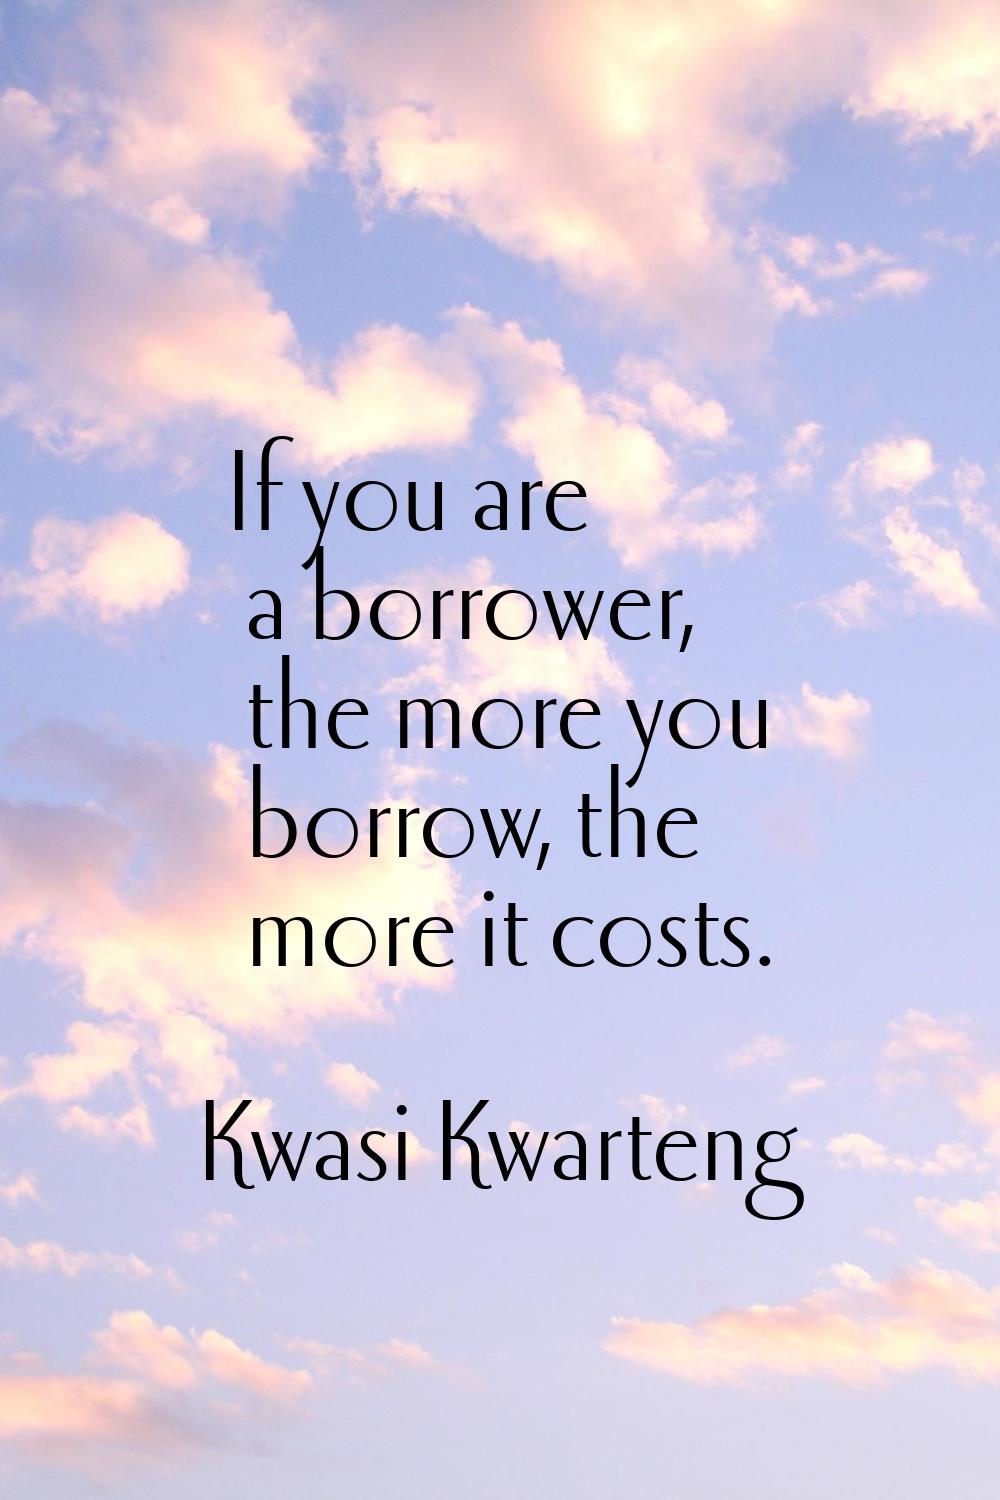 If you are a borrower, the more you borrow, the more it costs.